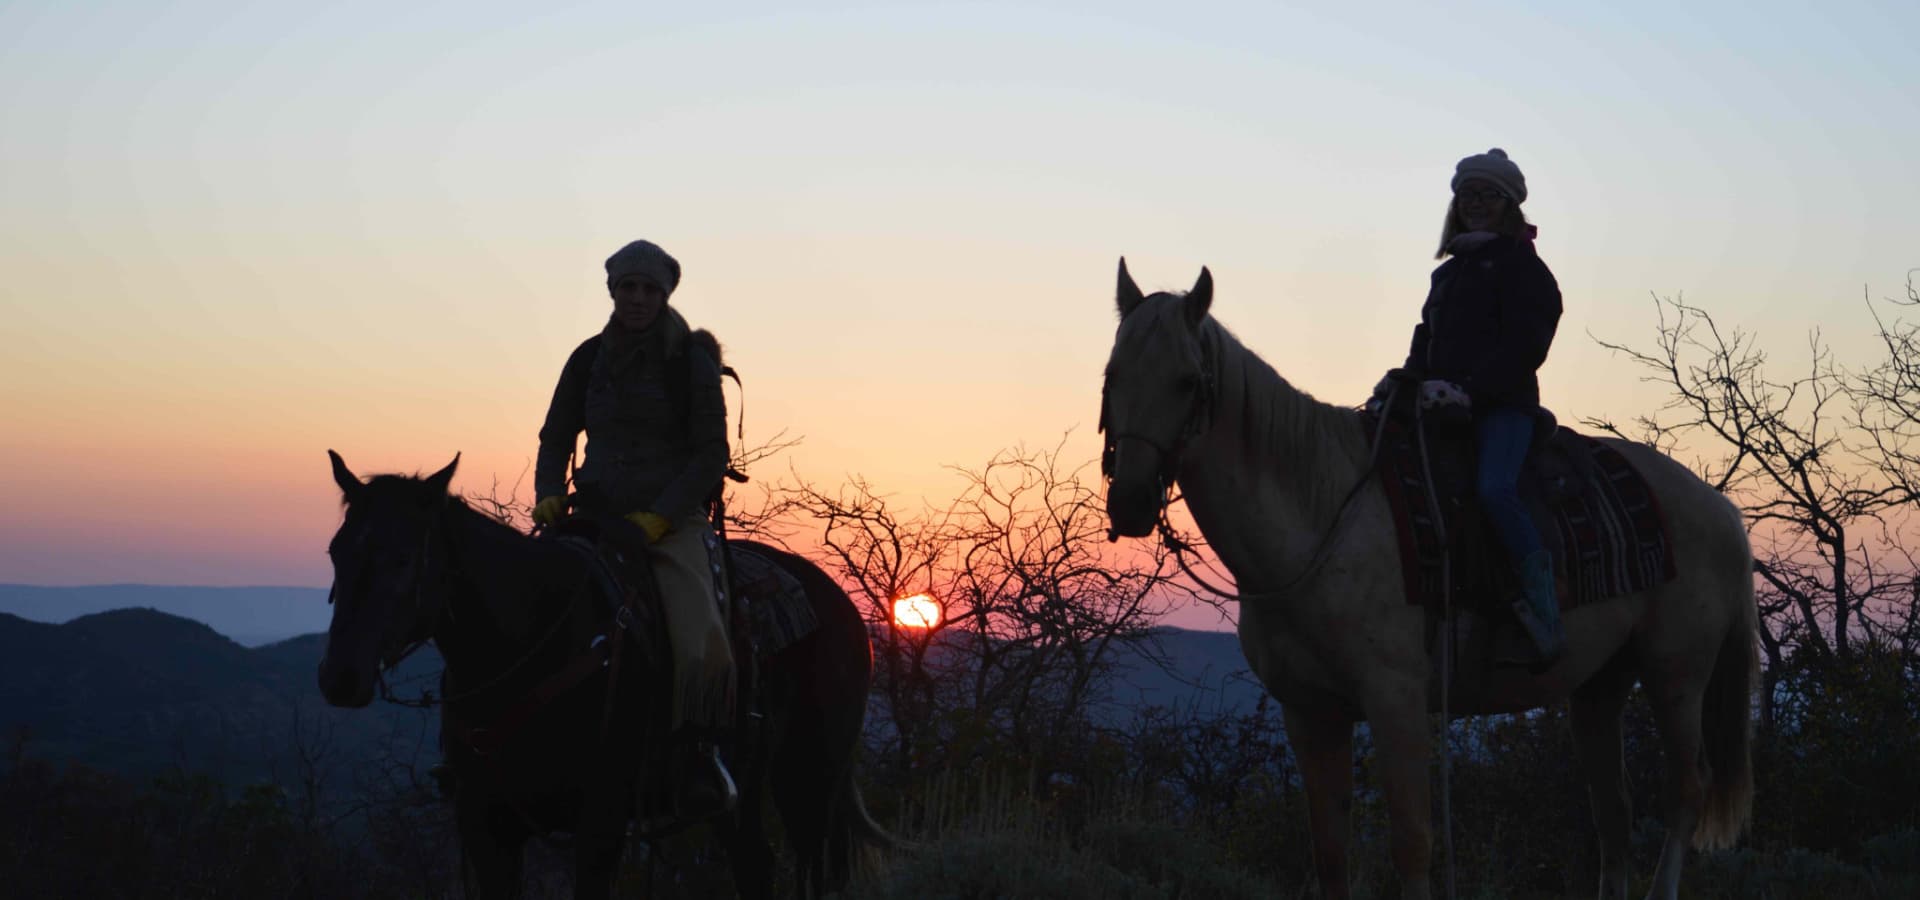 horseback riding in the sunset with rocky mountain outfitters